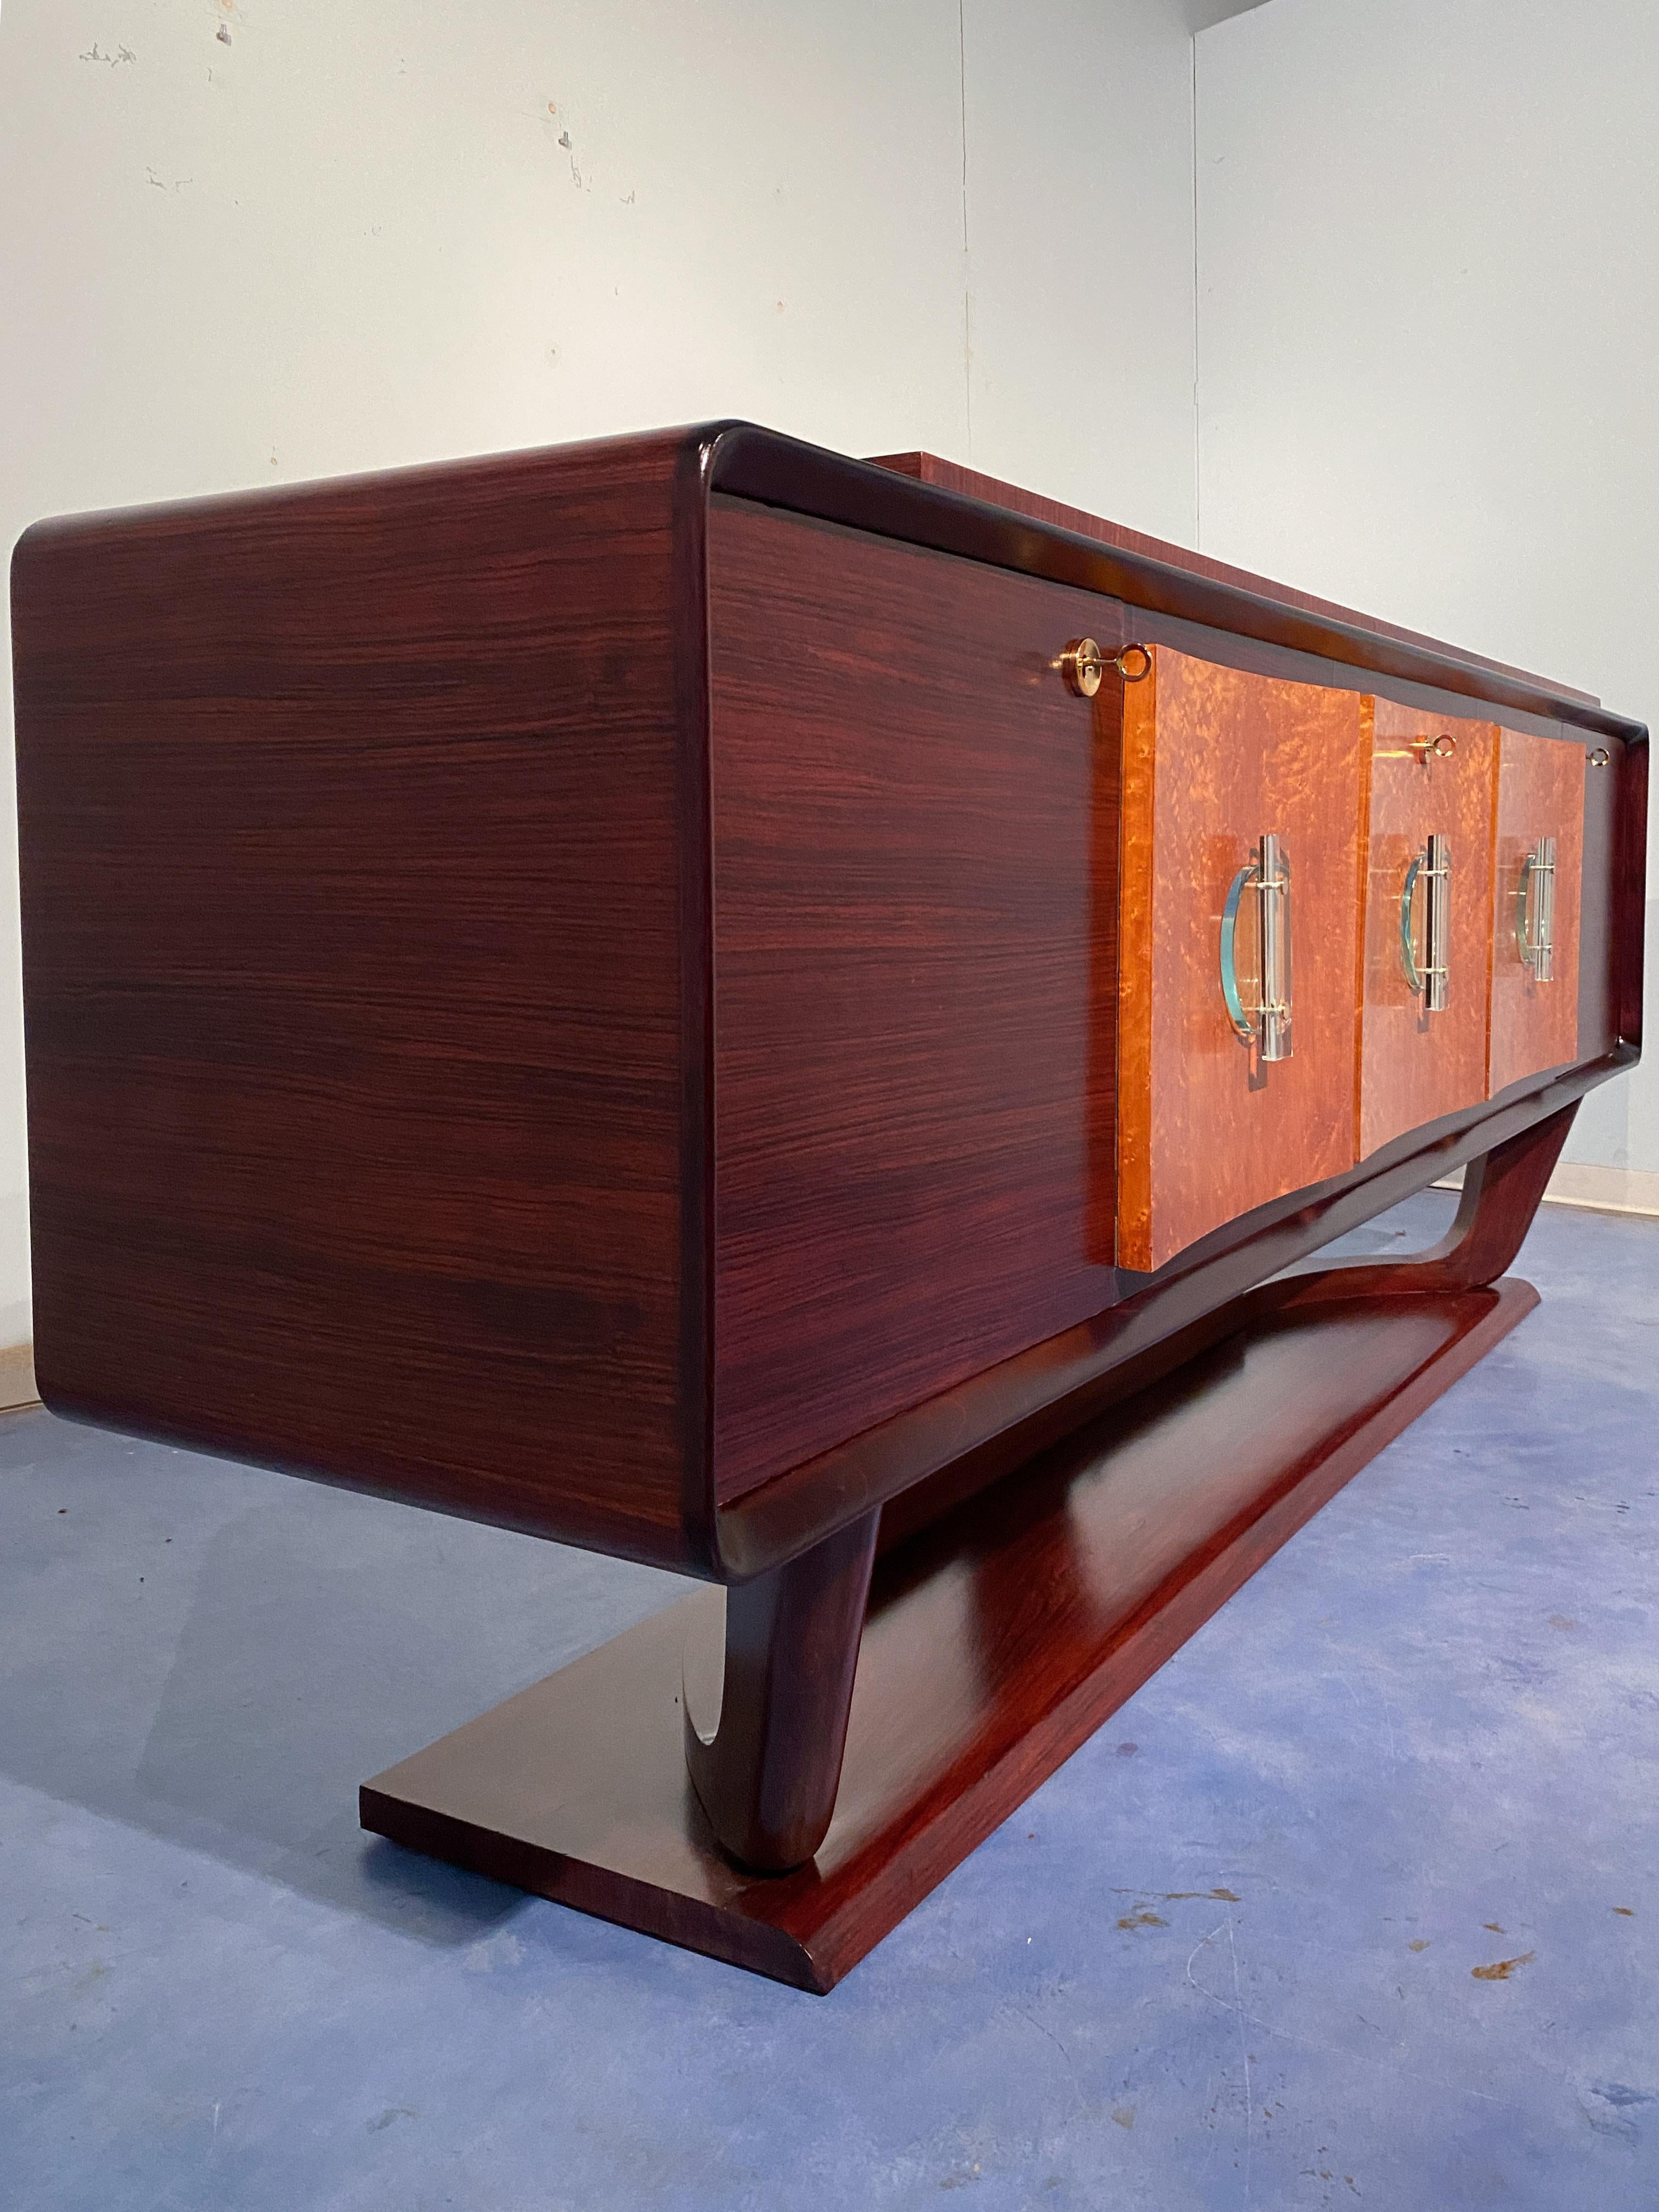 Italian Art Deco Sideboard with Bar Cabinet Attributed to Osvaldo Borsani, 1940s In Good Condition For Sale In Traversetolo, IT